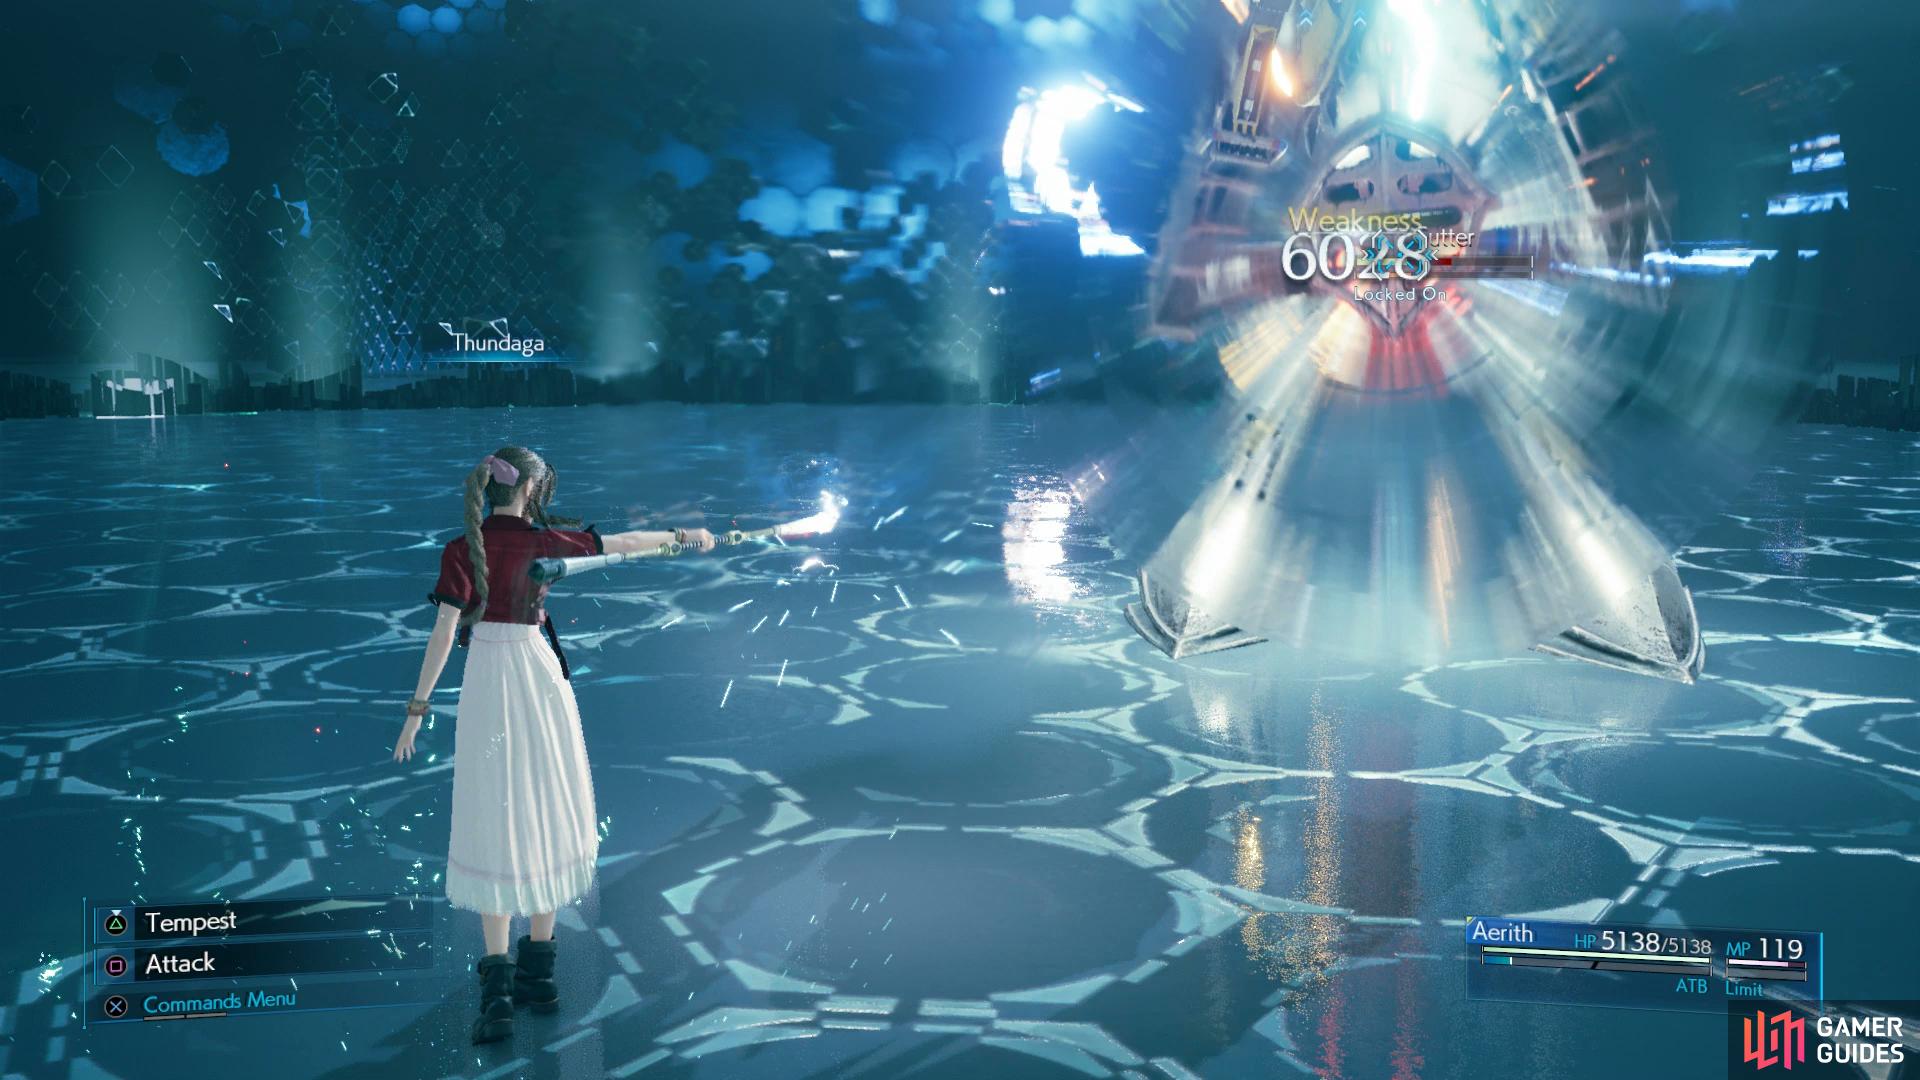 Aerith's Thunder spells will eat away at Cutter's HP in no time at all.